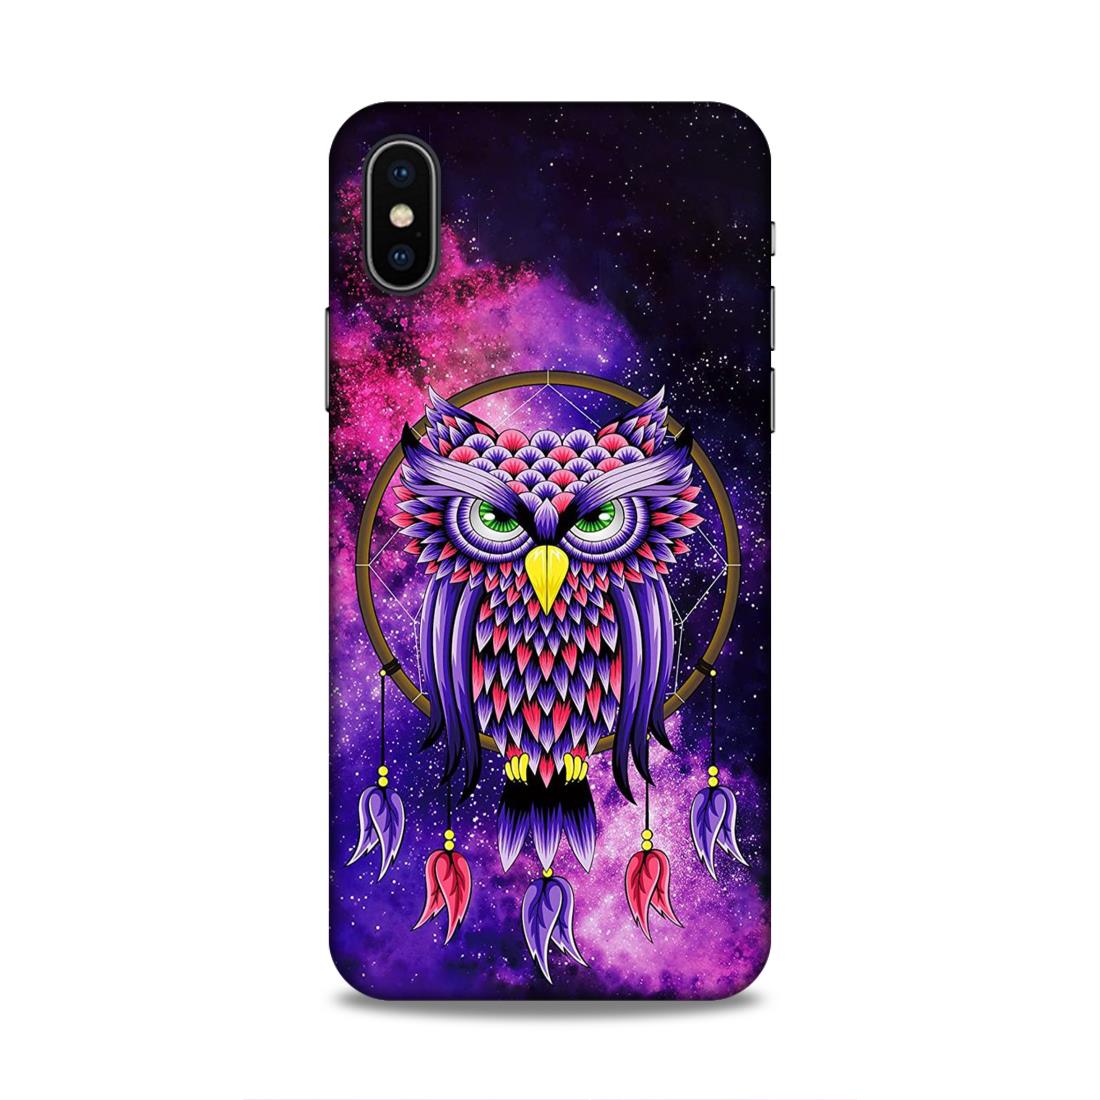 Dreamcatcher Owl Hard Back Case For Apple iPhone X/XS